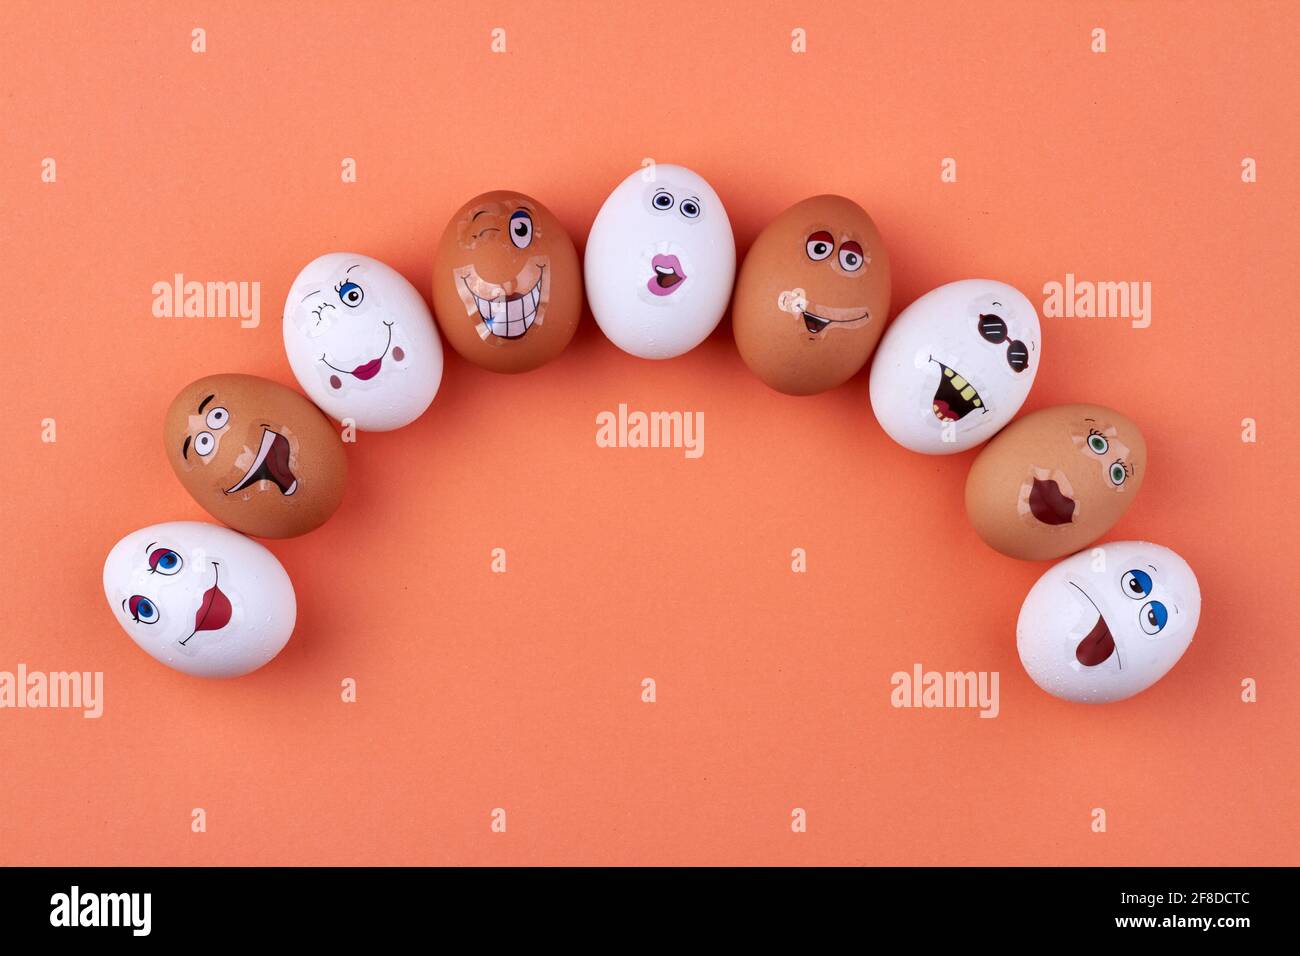 Group of white and brown eggs with smiley faces. Stock Photo